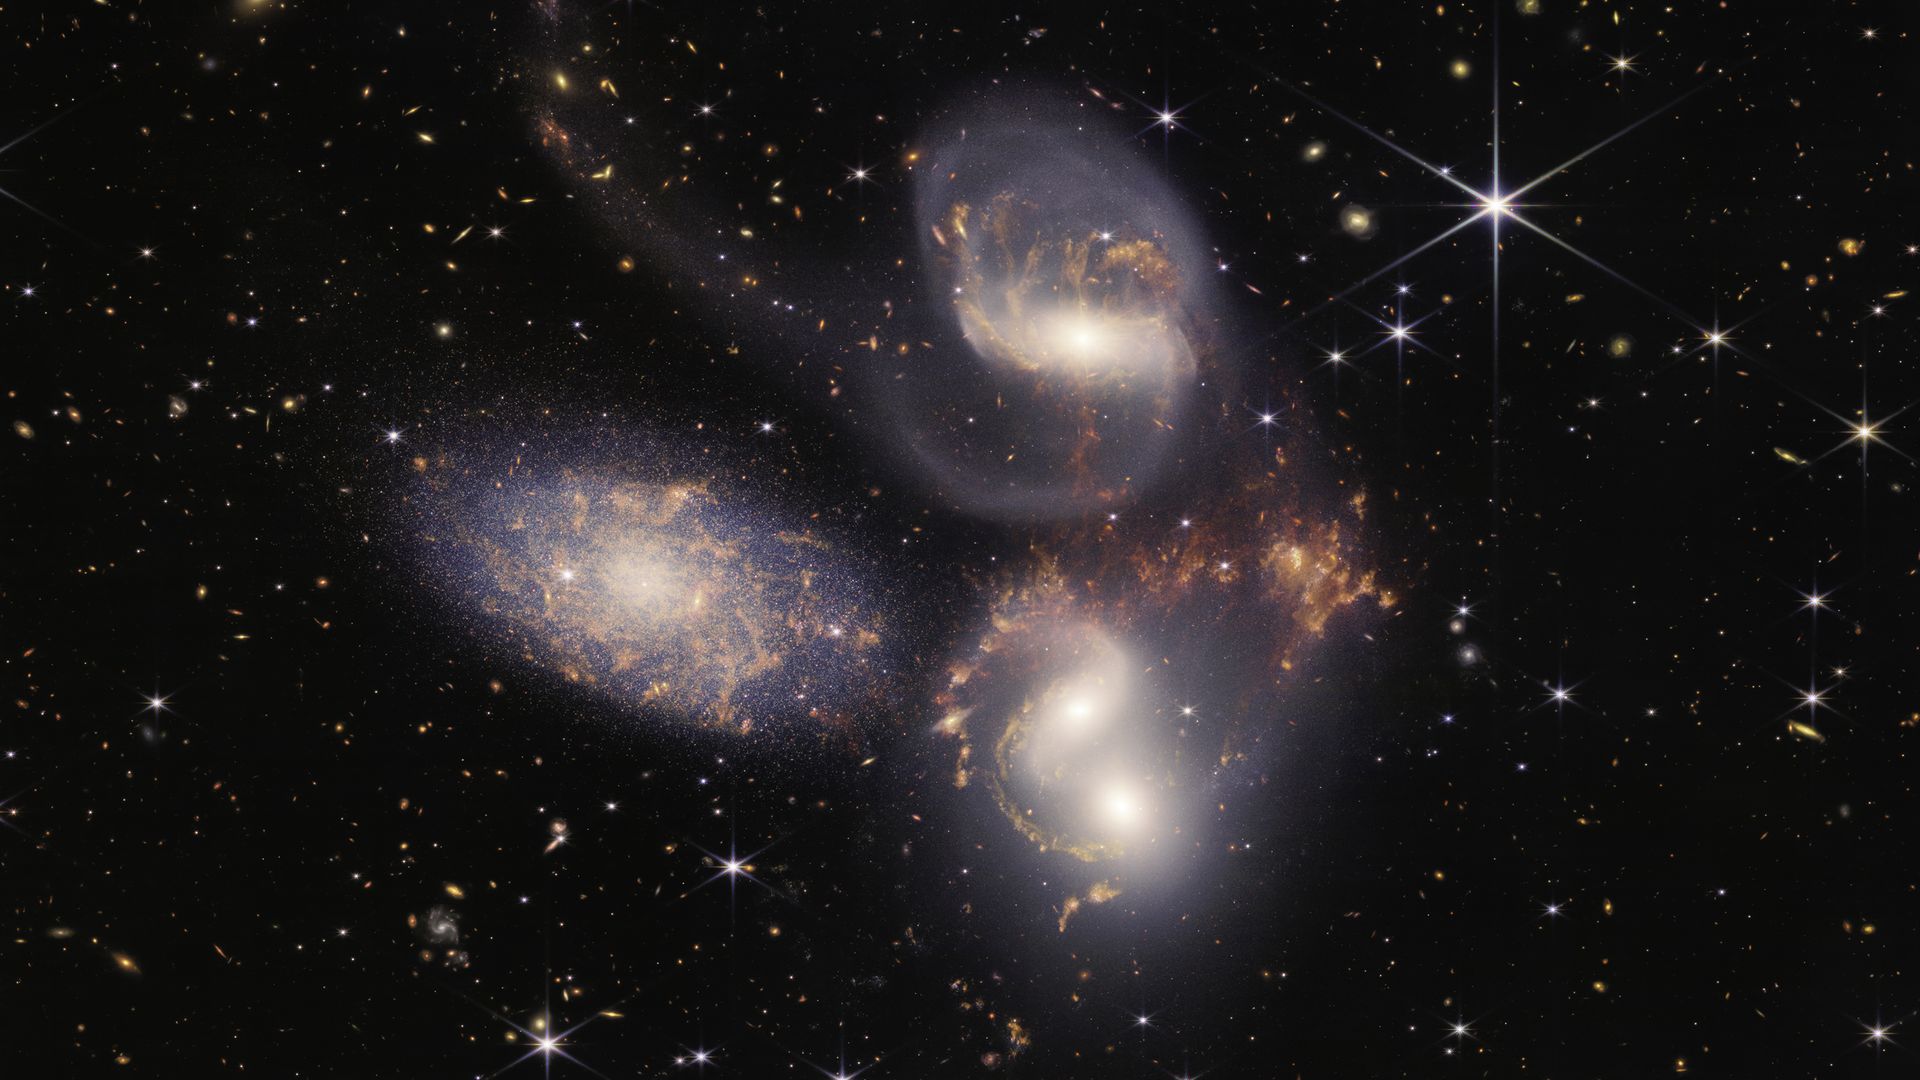 Five galaxies in Stephan's Quintet seen by the JWST.